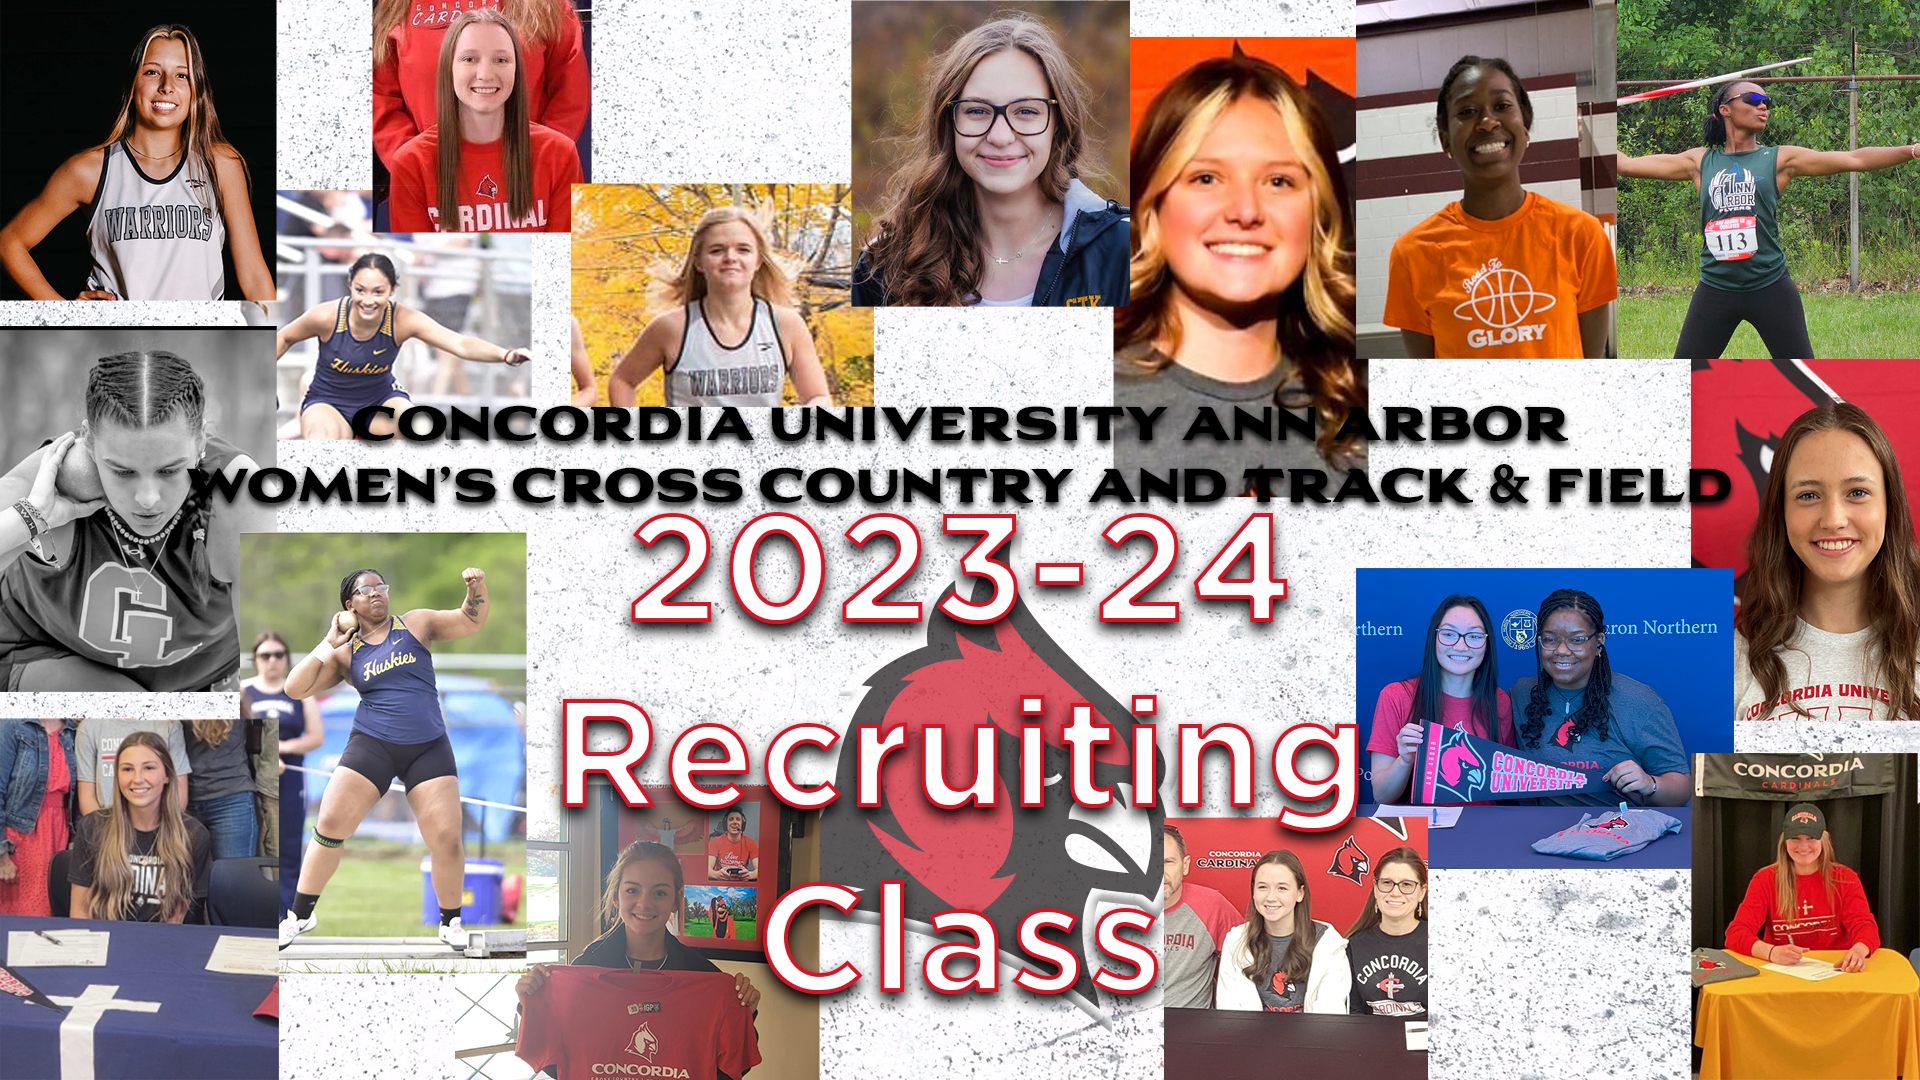 Women's Cross Country and Track &amp; Field announce the 2023-24 Recruiting Class